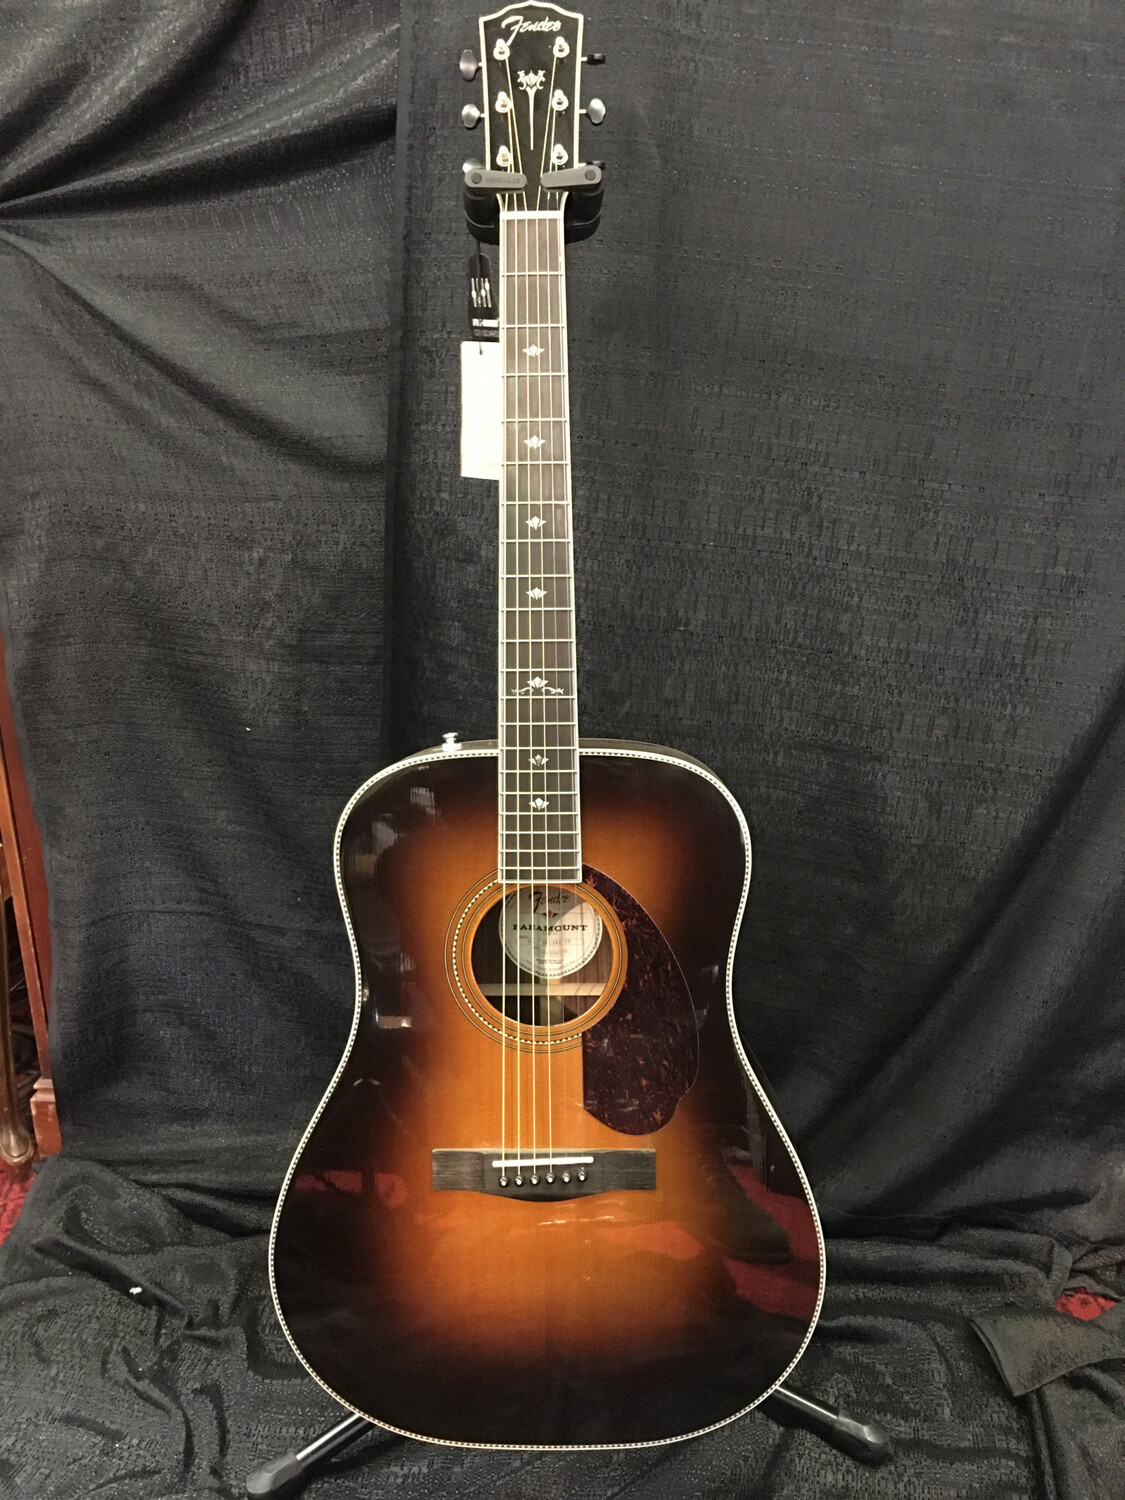 Fender PM-1 Deluxe Dreadnought Acoustic W/ Active Fishman Pickup And Case